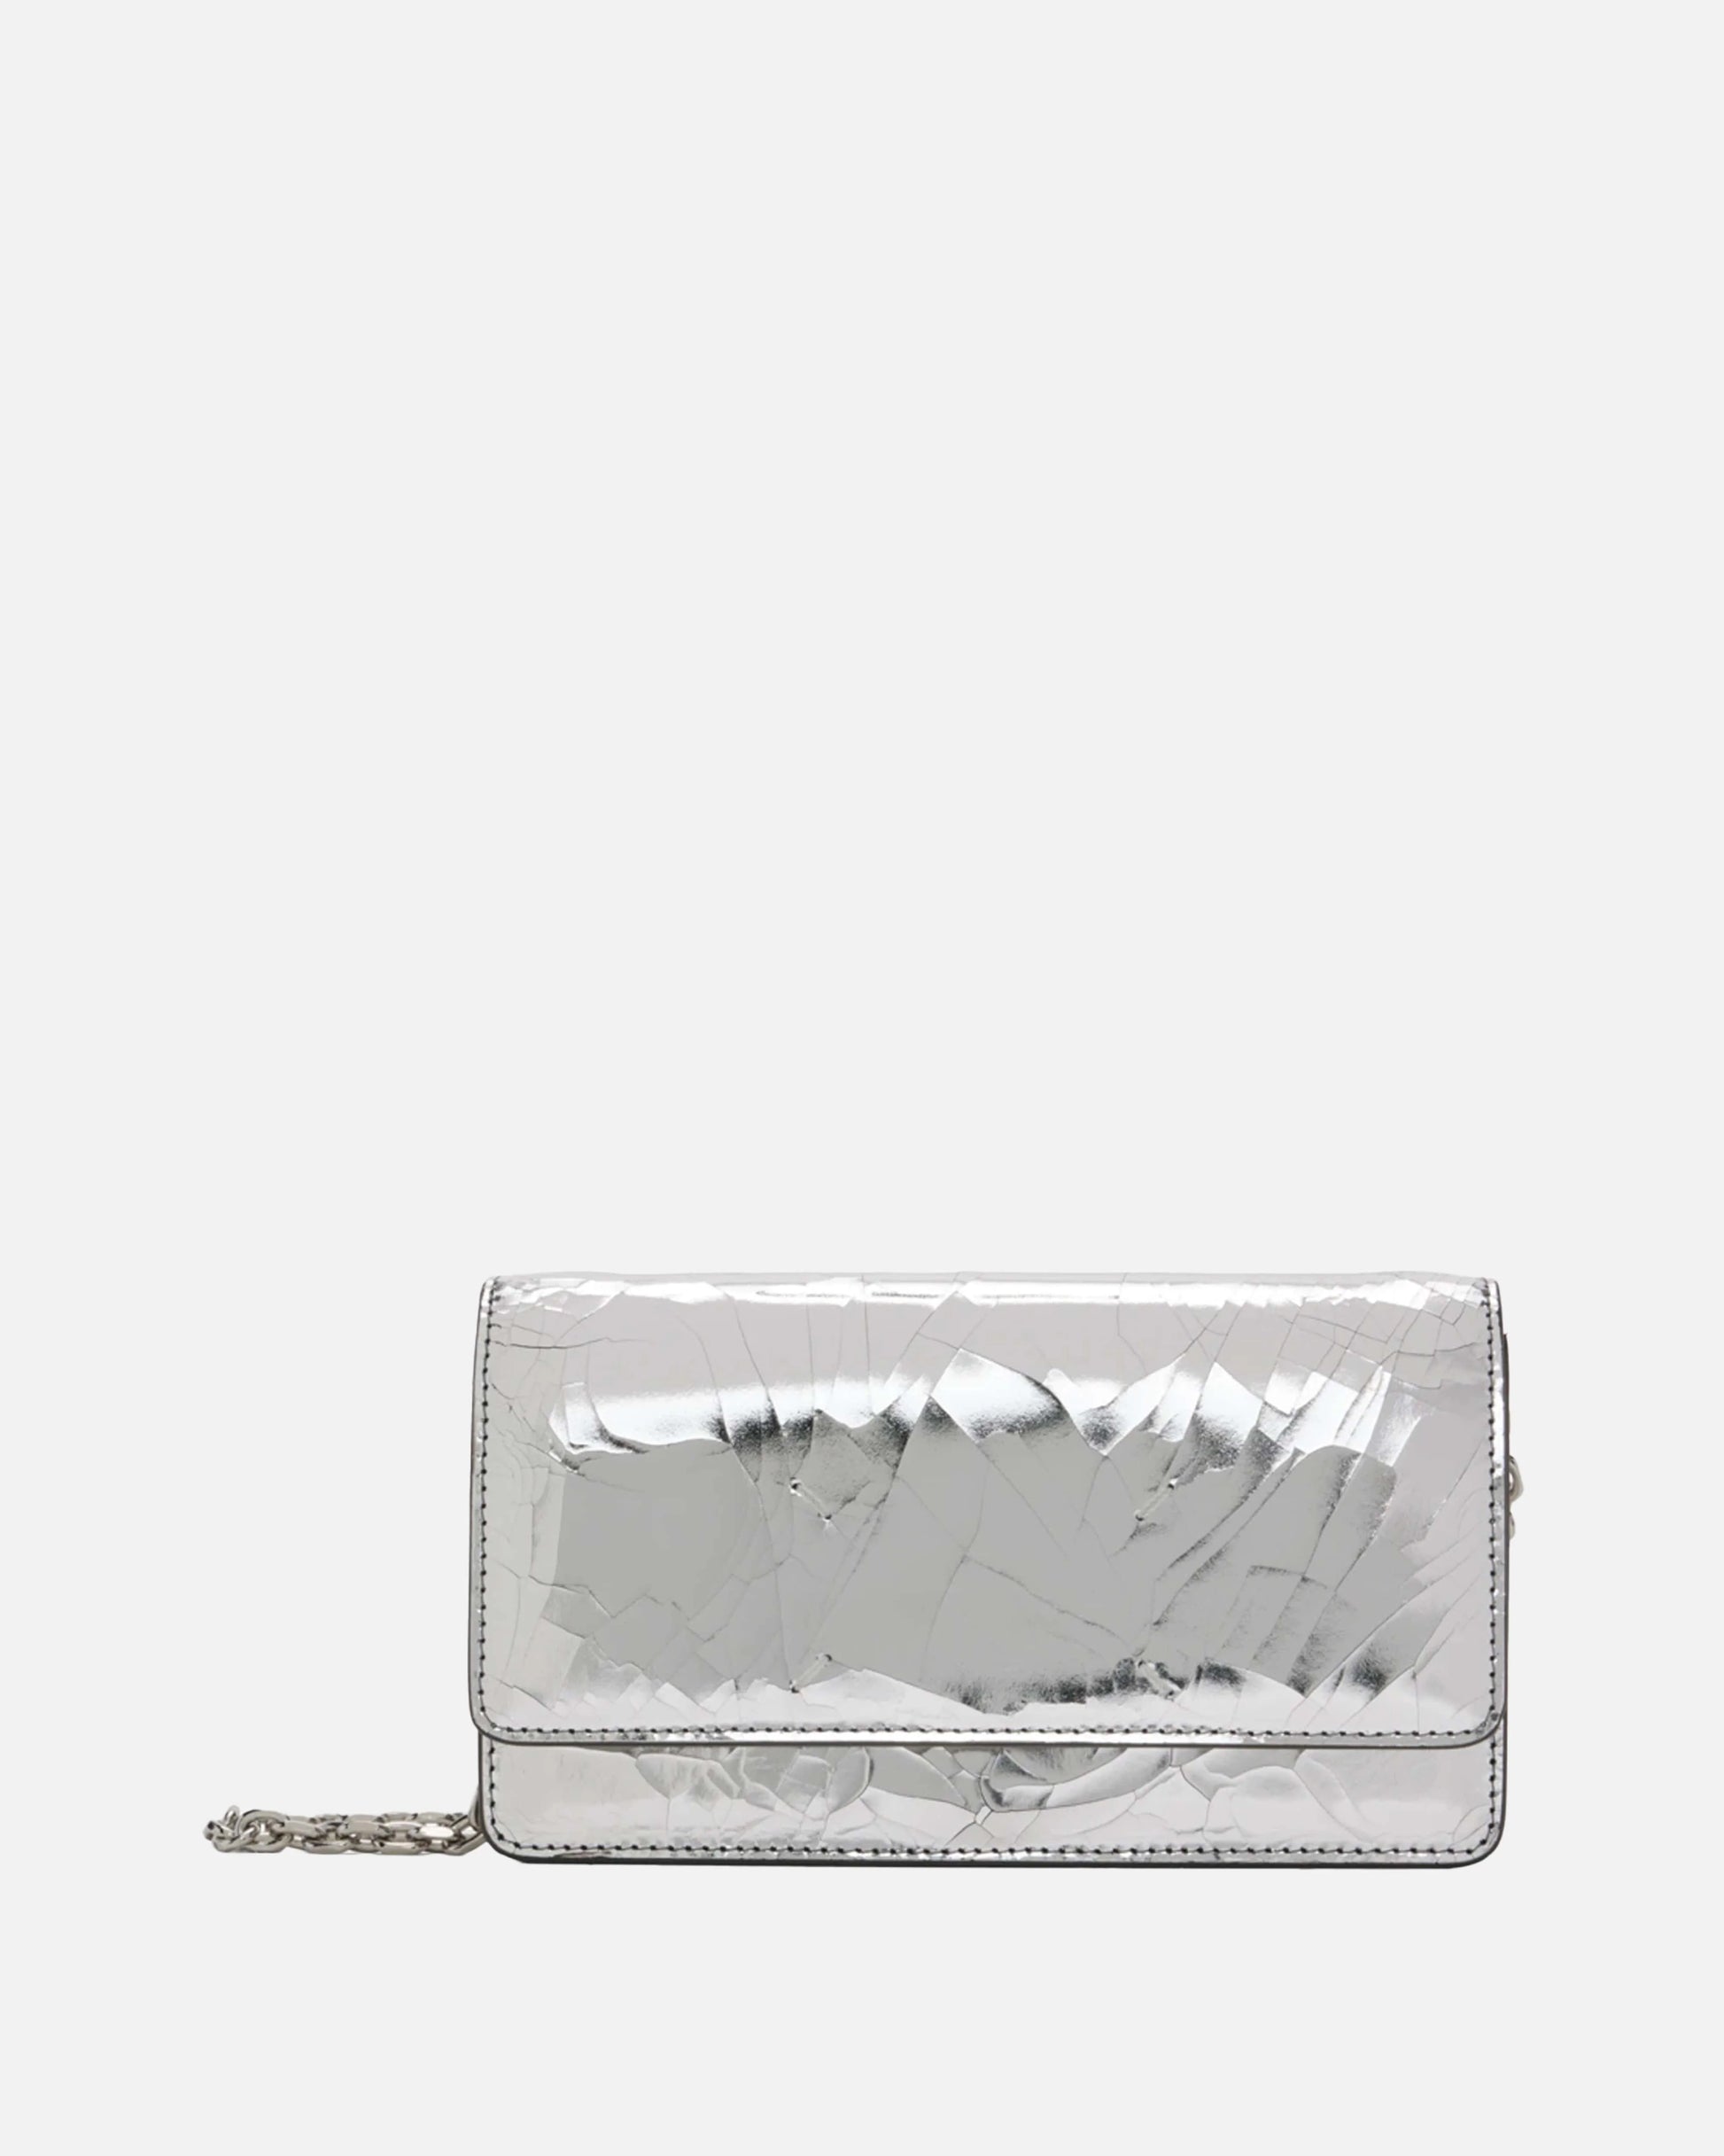 Maison Margiela Leather Goods Leather Chain Wallet in Silver